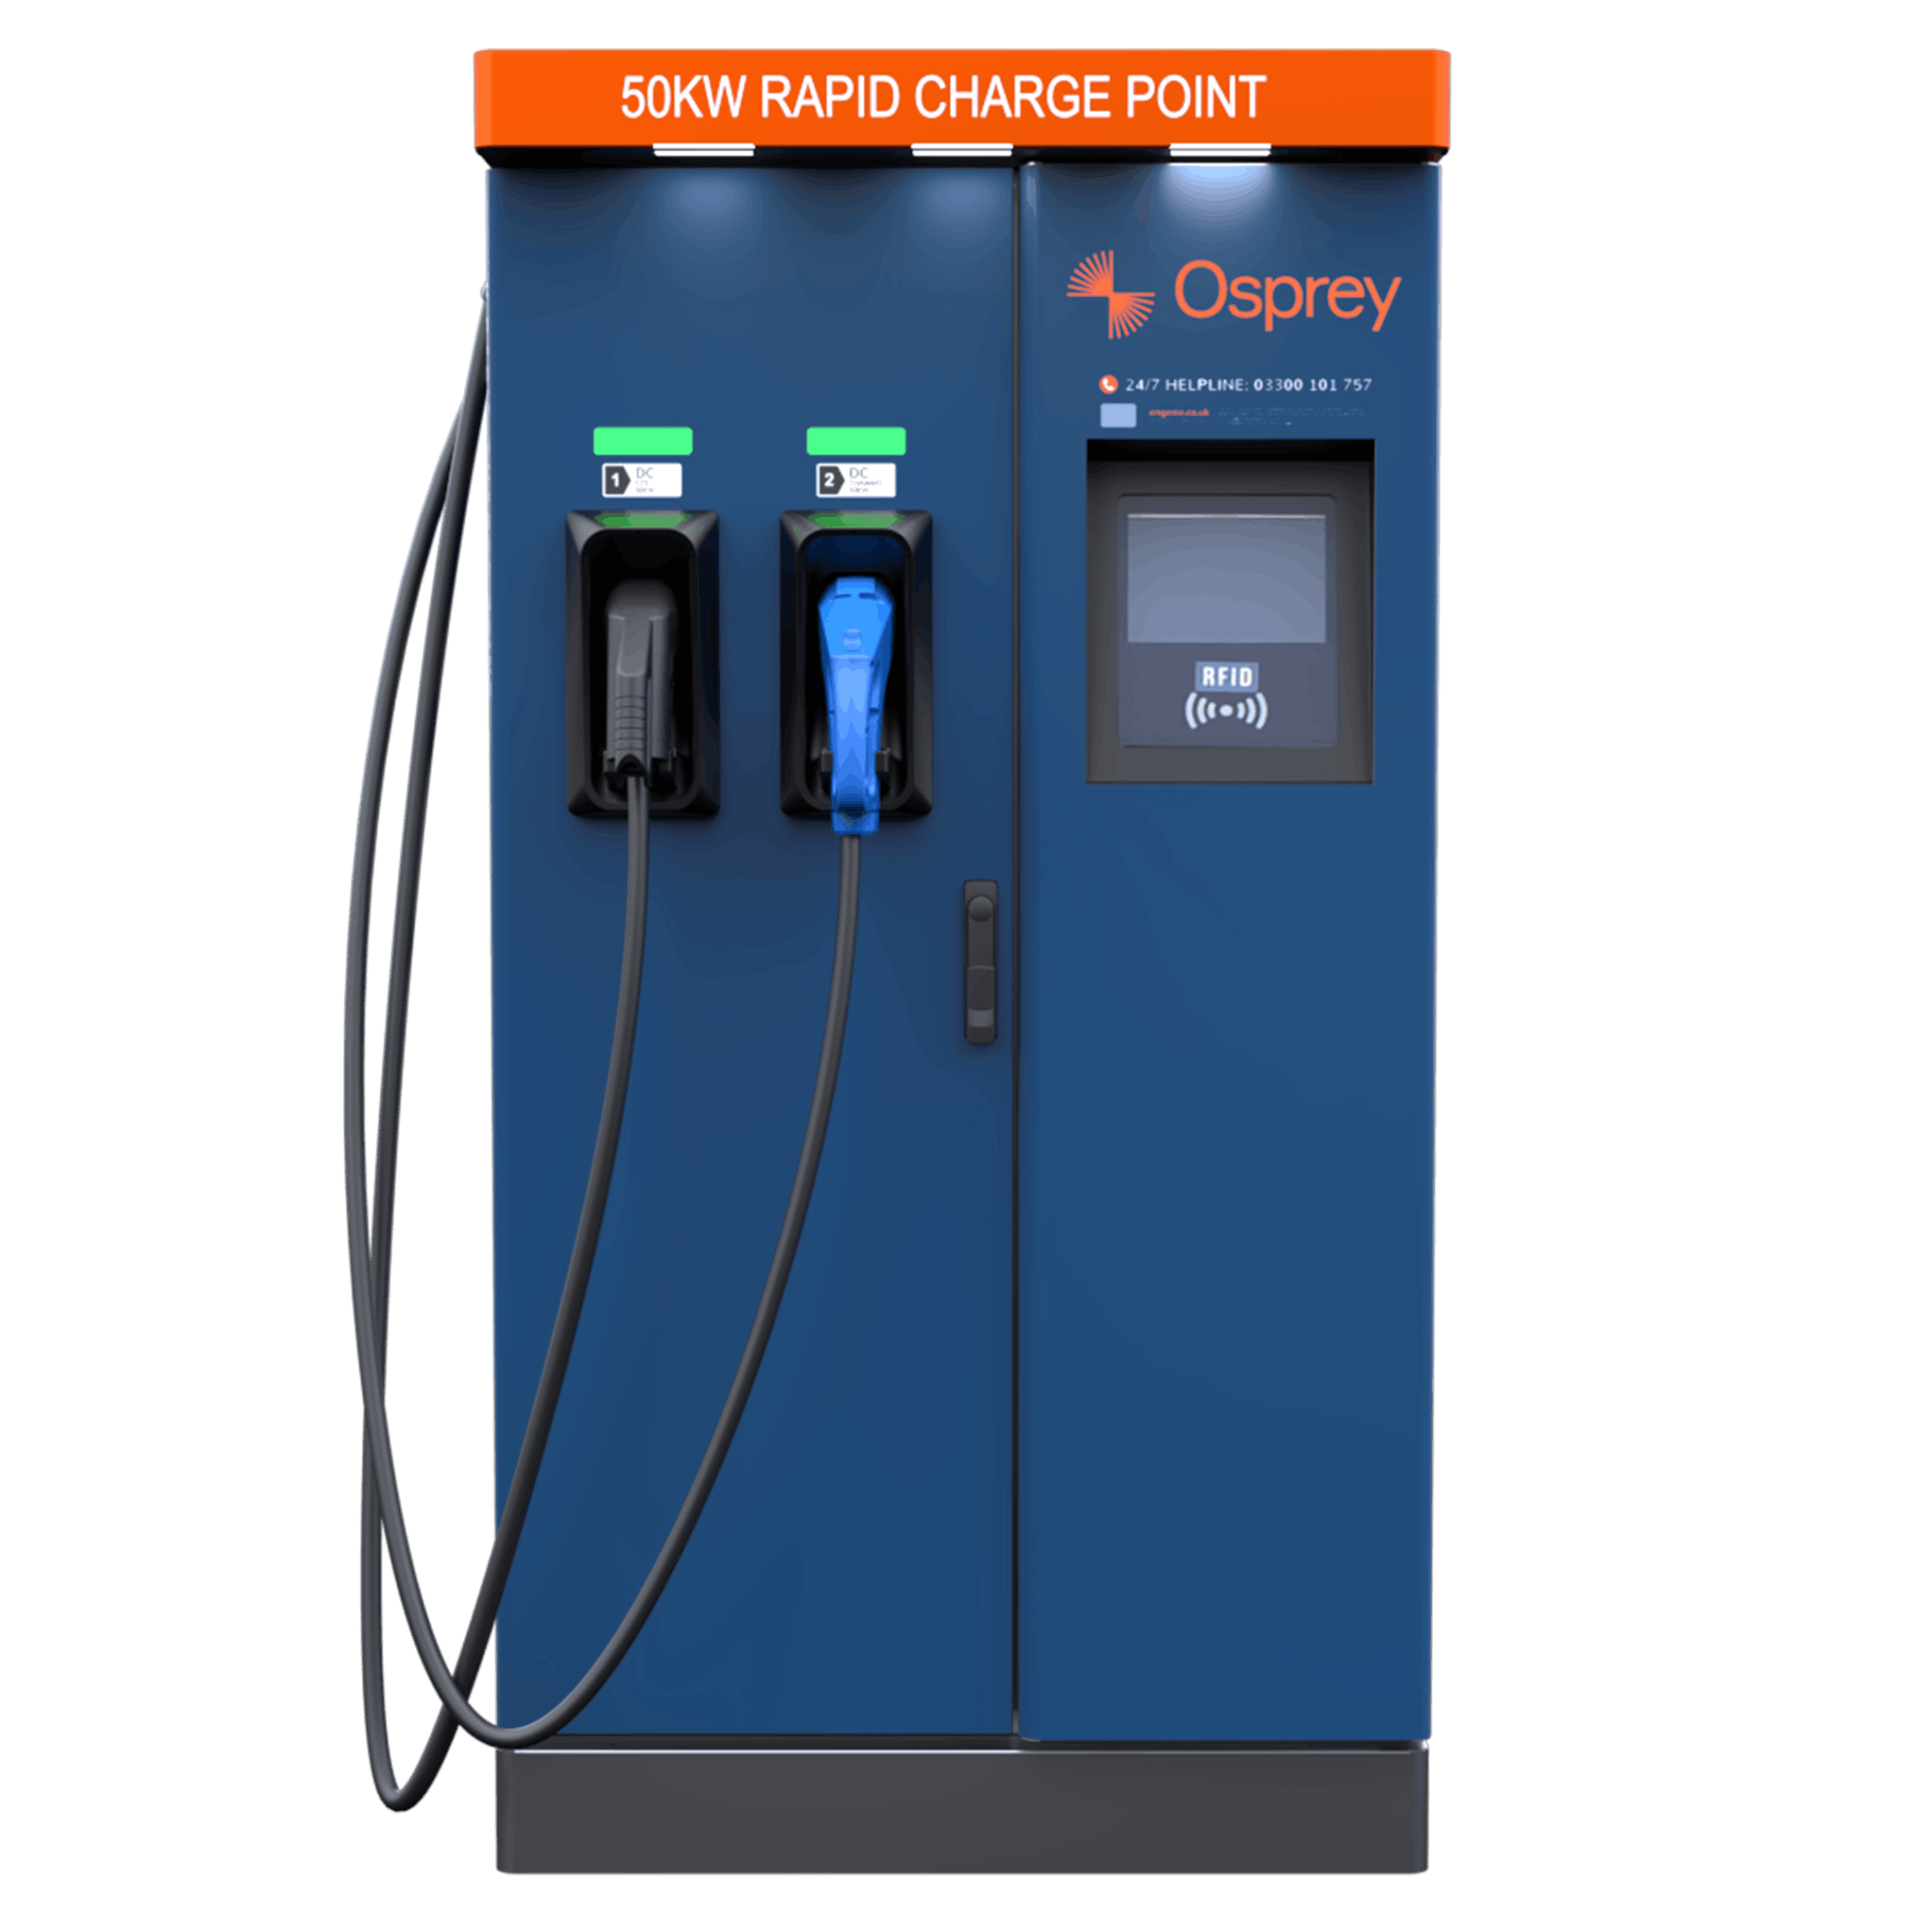 Osprey 50kW rapid charger